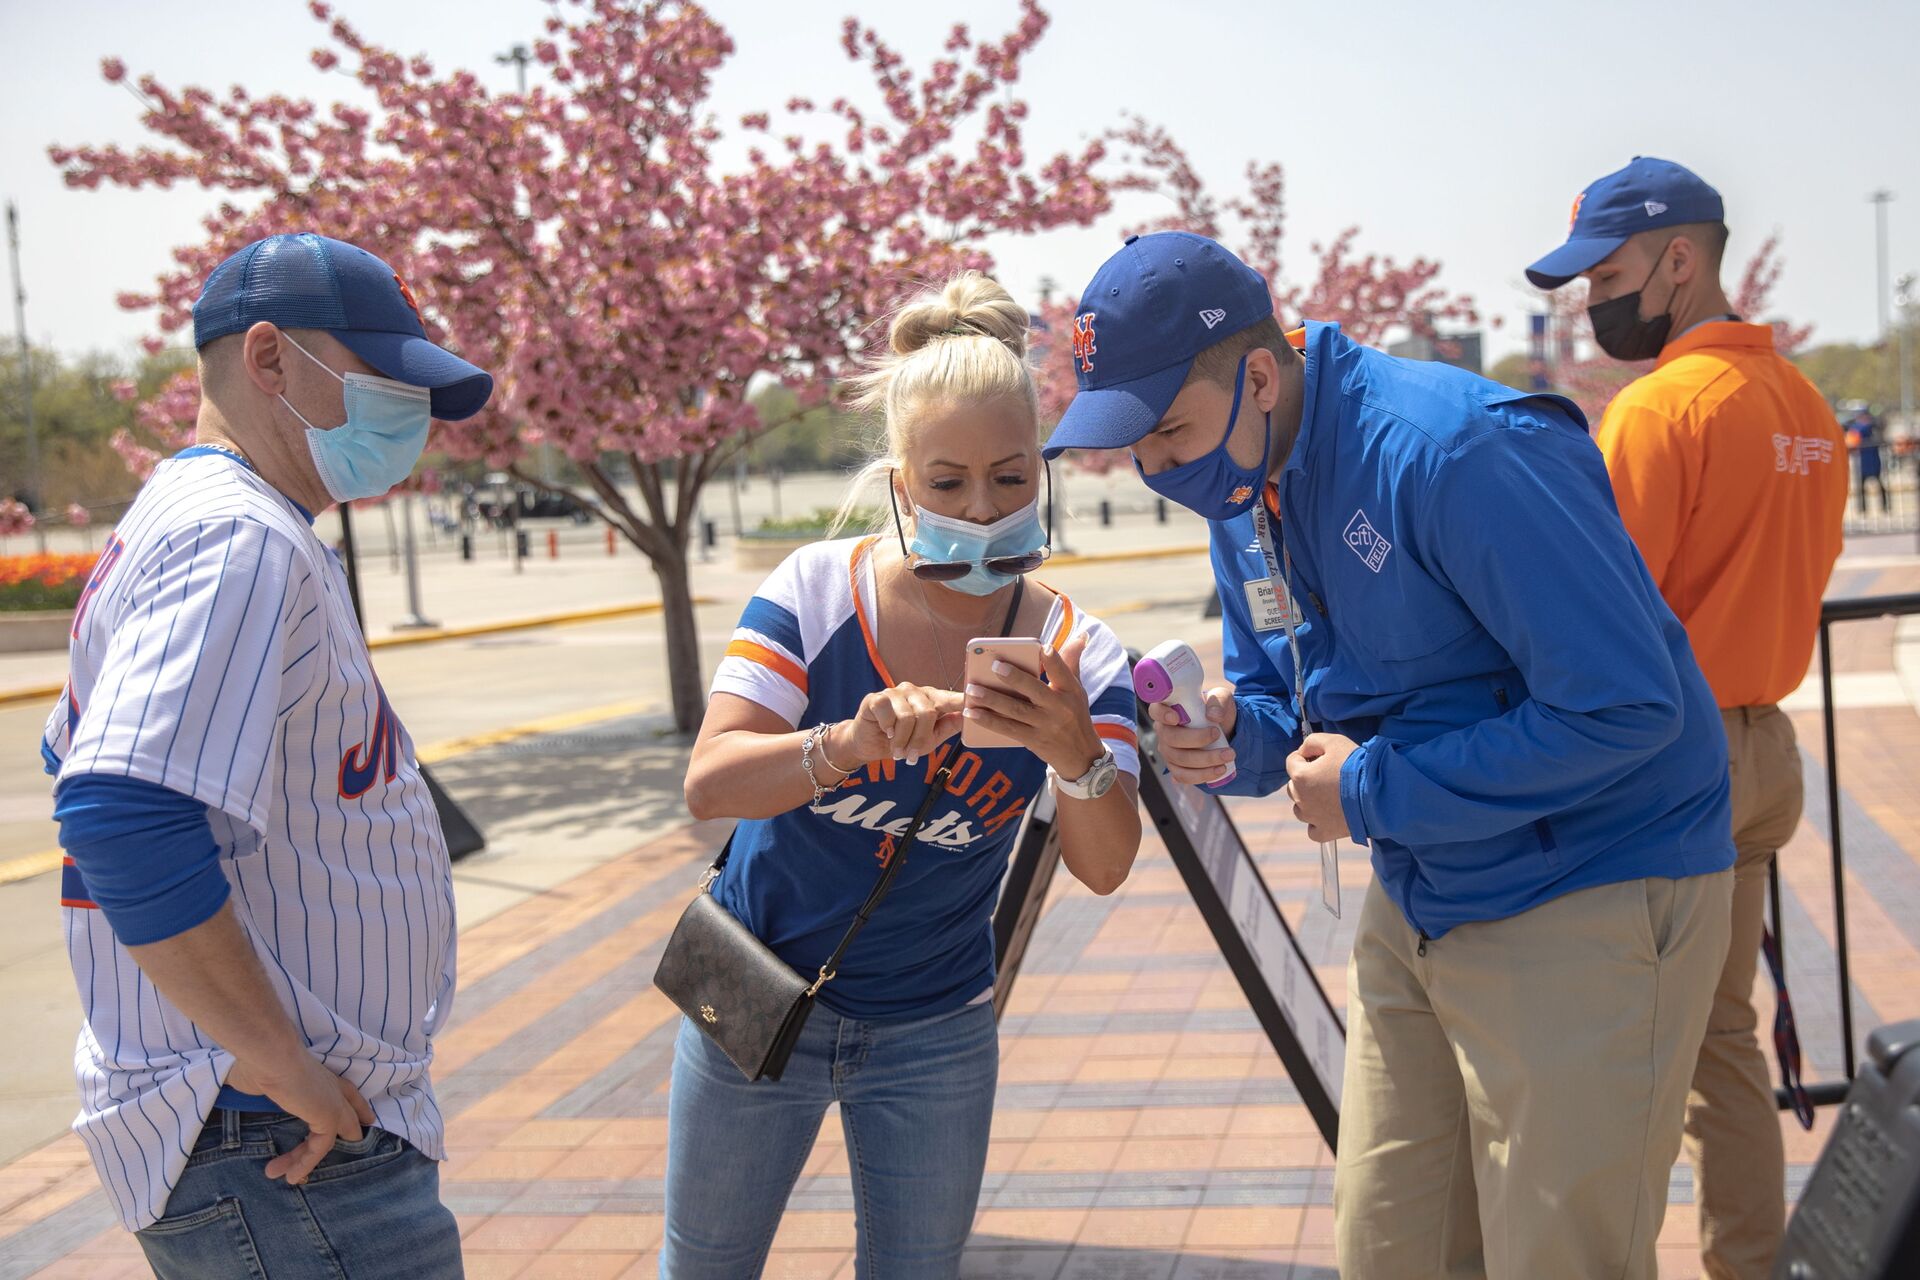 A fan shows a vaccine passport on her phone as she arrives for a New York Mets game, during the coronavirus disease (COVID-19) pandemic, at Citi Field in the Queens borough of New York City, U.S., April 24, 2021 - Sputnik International, 1920, 07.09.2021